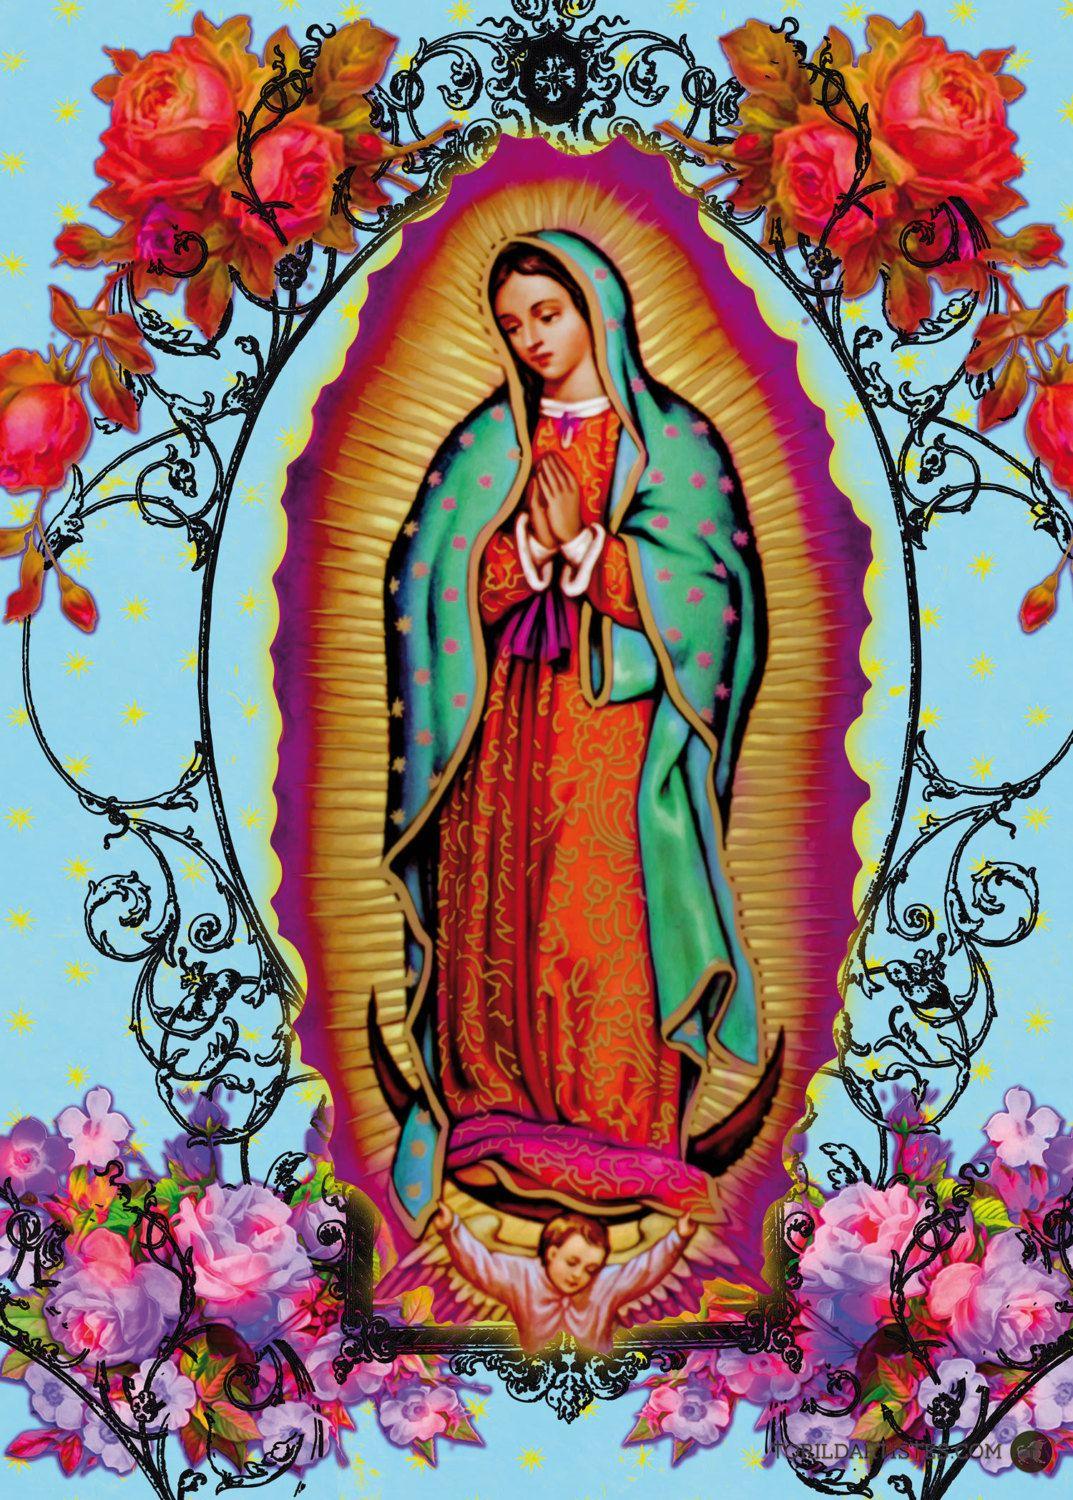 Poster of the Virgin Guadalupe Fleurie Madonna Mexican woman